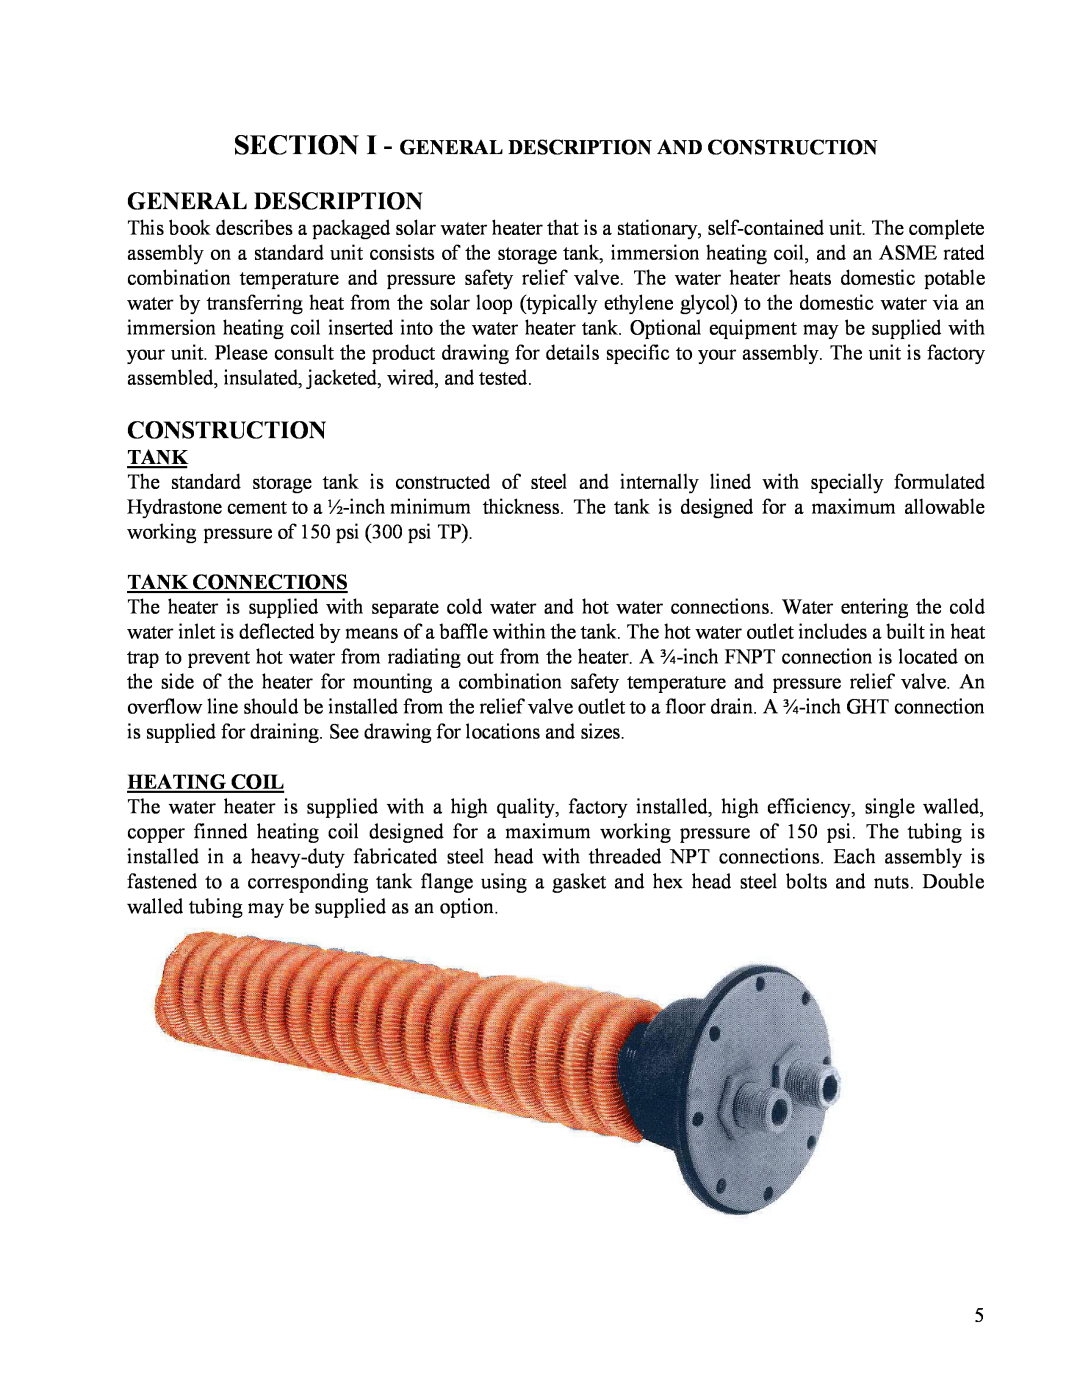 Hubbell Electric Heater Company SLN manual Section I - General Description And Construction, Tank Connections 